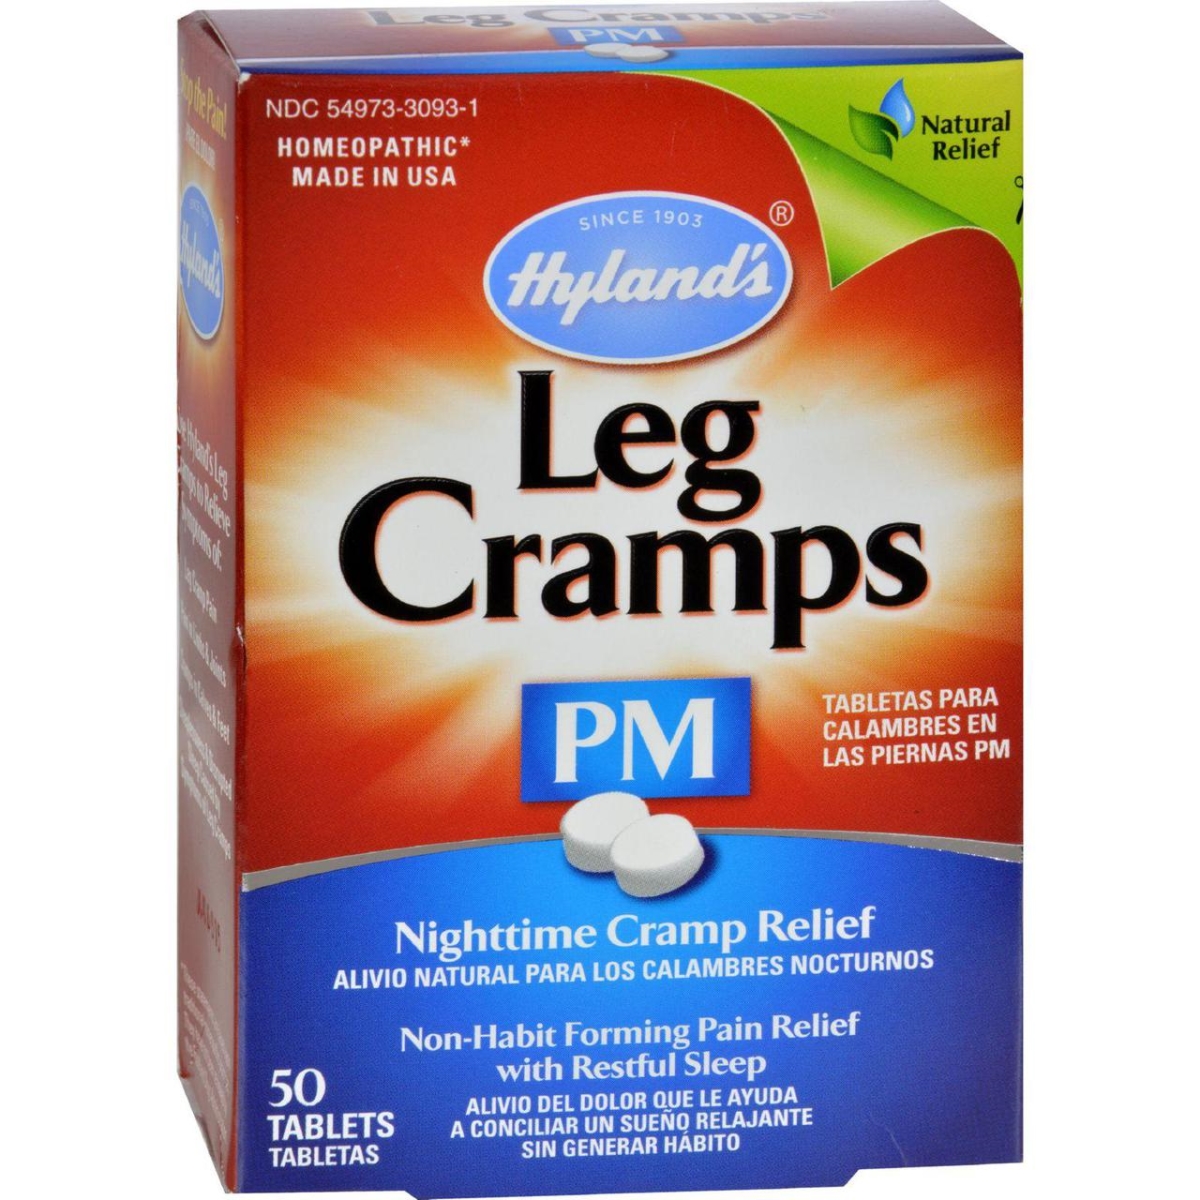 Hg0139022 Leg Cramps Pm With Quinine, 50 Tablets